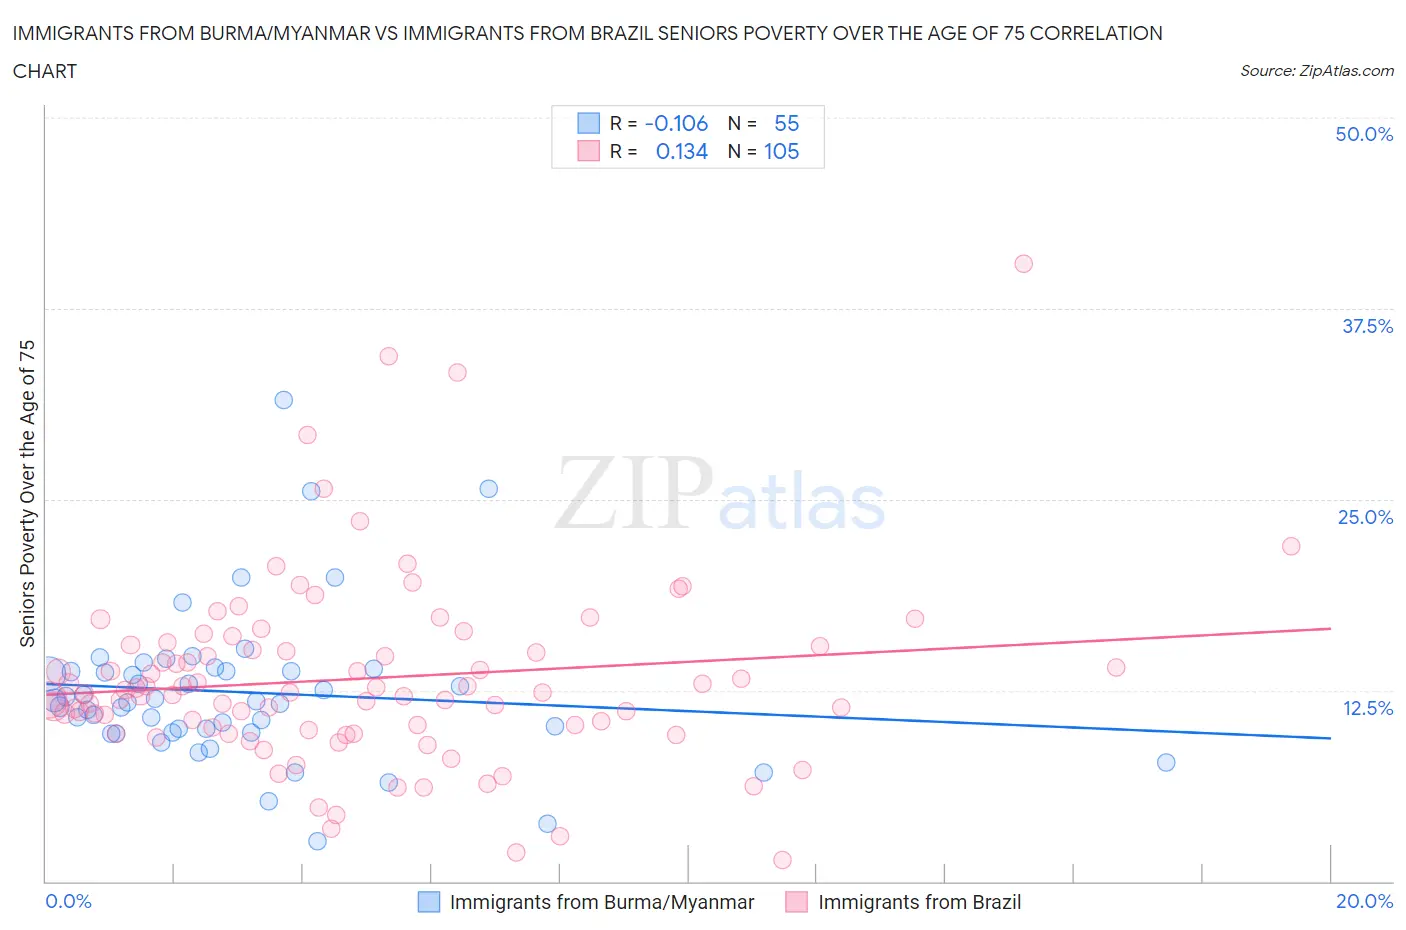 Immigrants from Burma/Myanmar vs Immigrants from Brazil Seniors Poverty Over the Age of 75